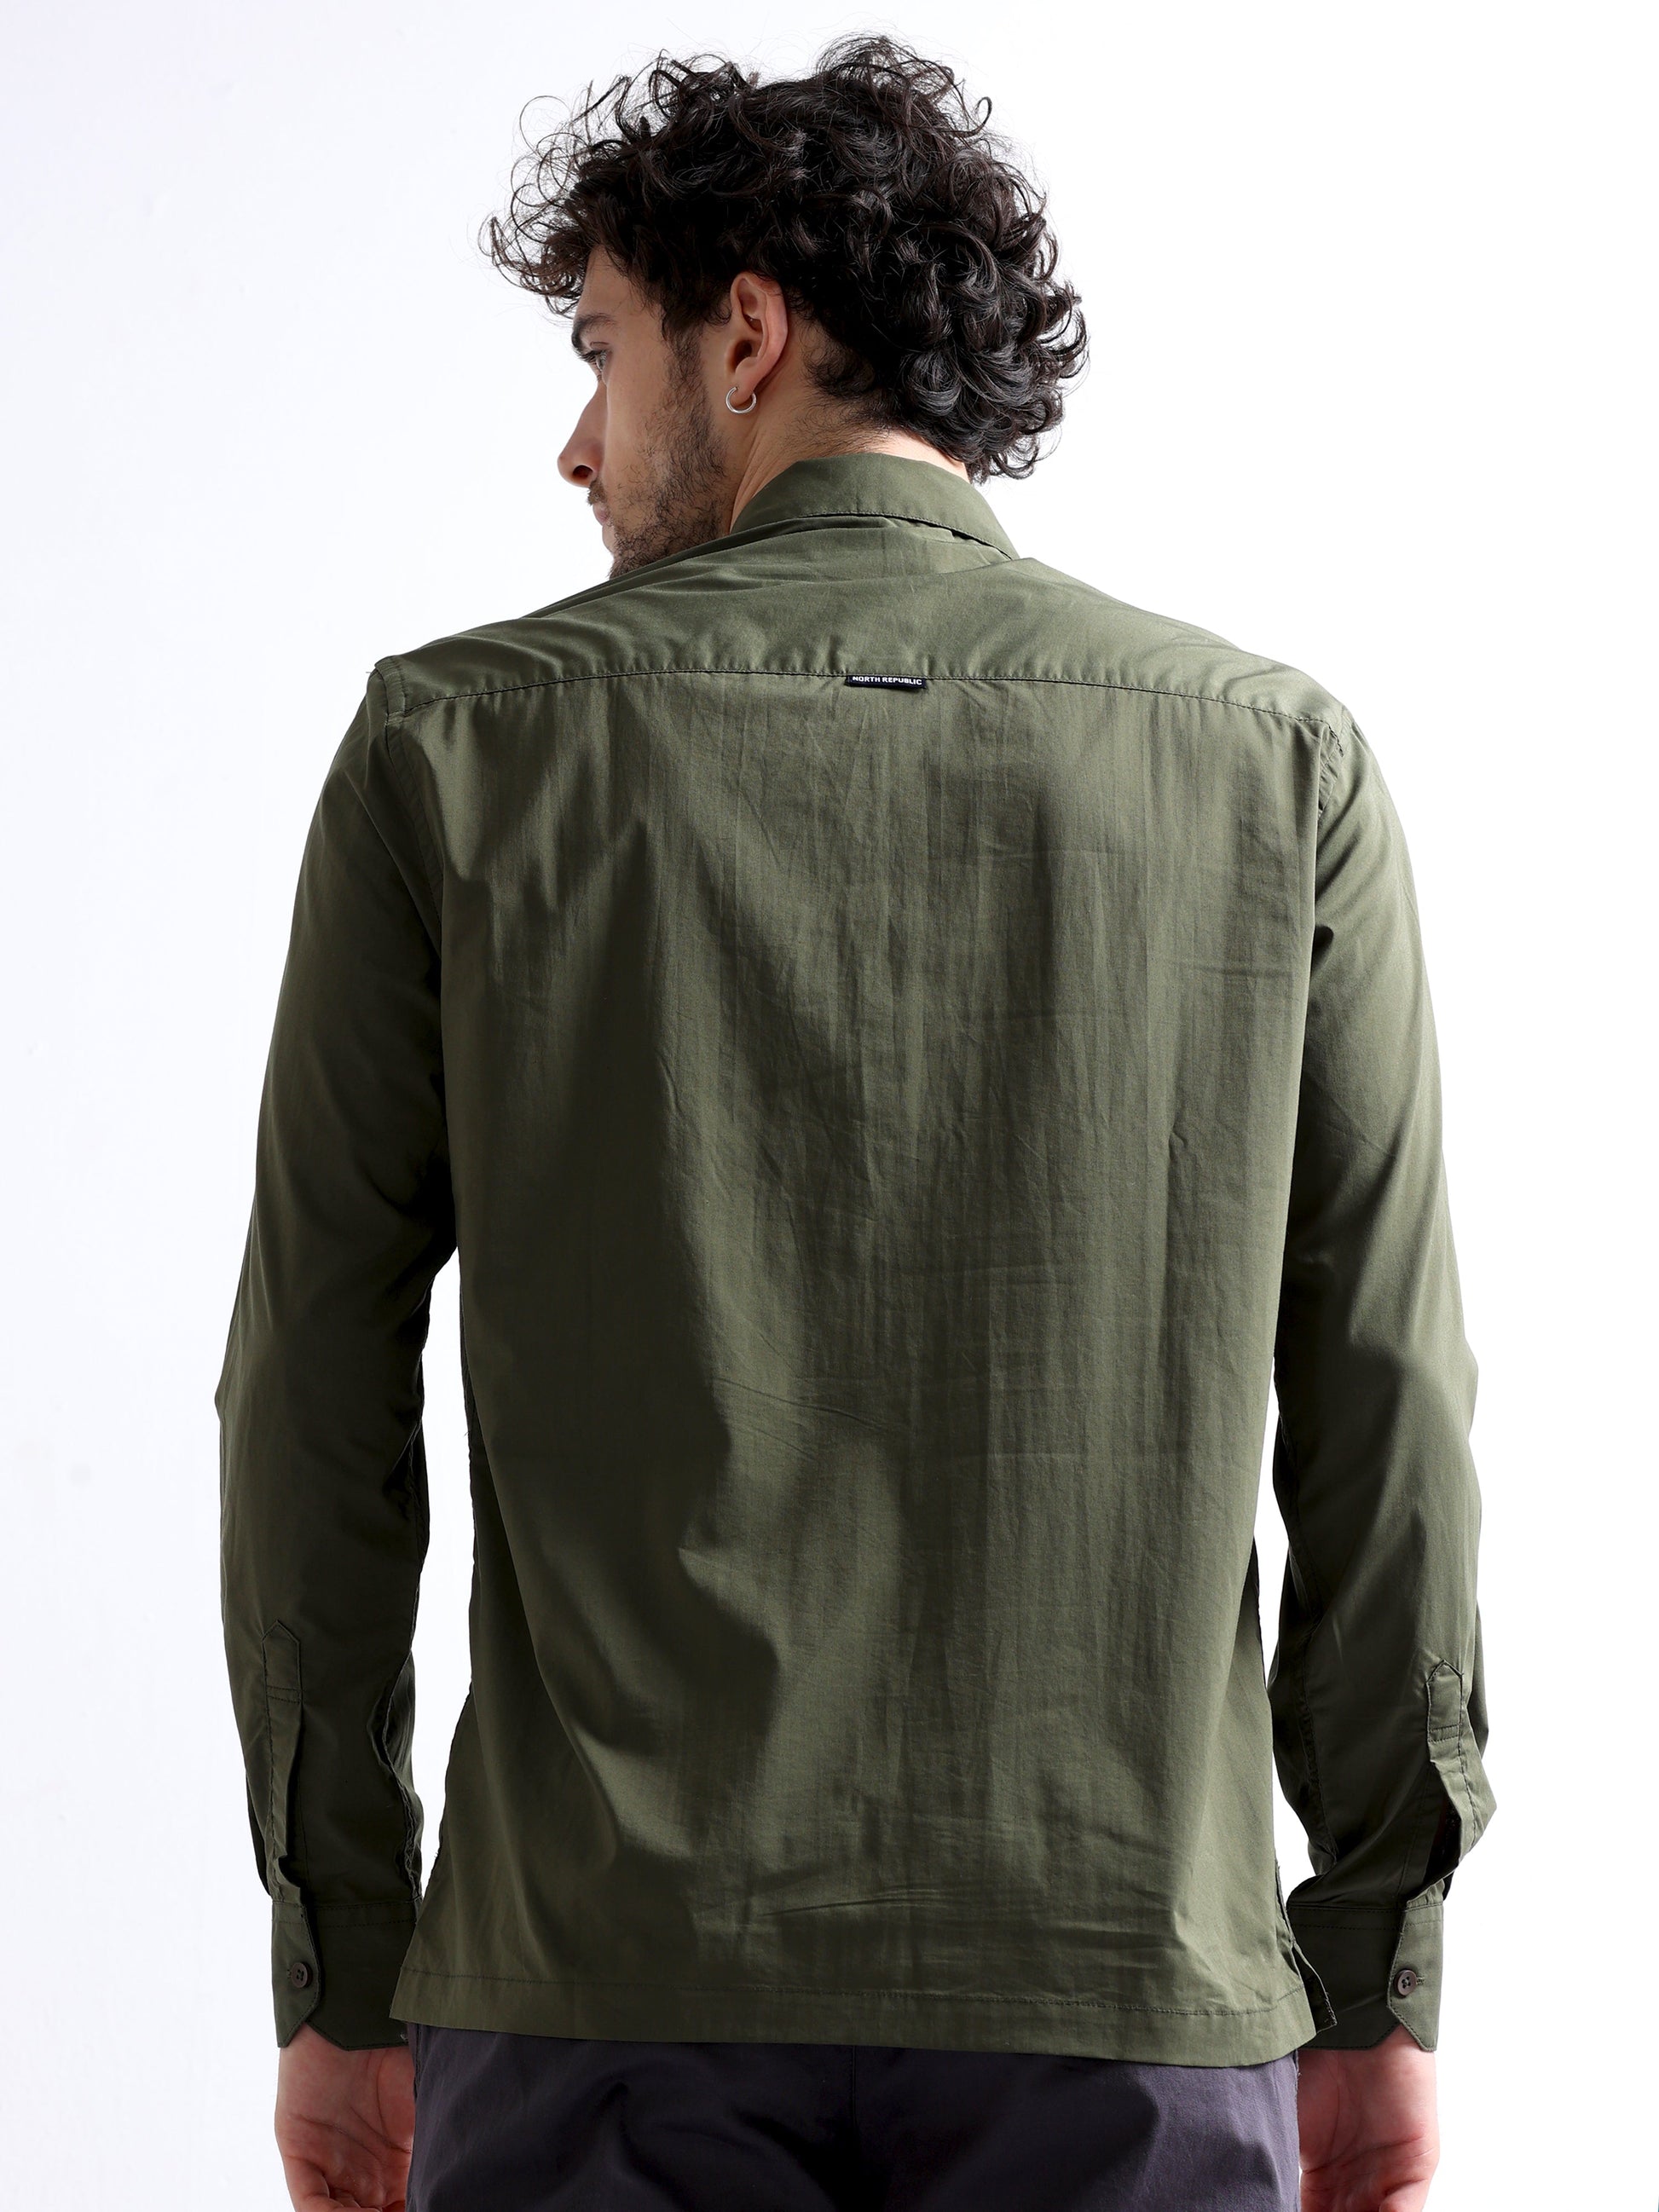 Buy Cut and Sew Double Pocket Pullover Men's Wear Shirt Online